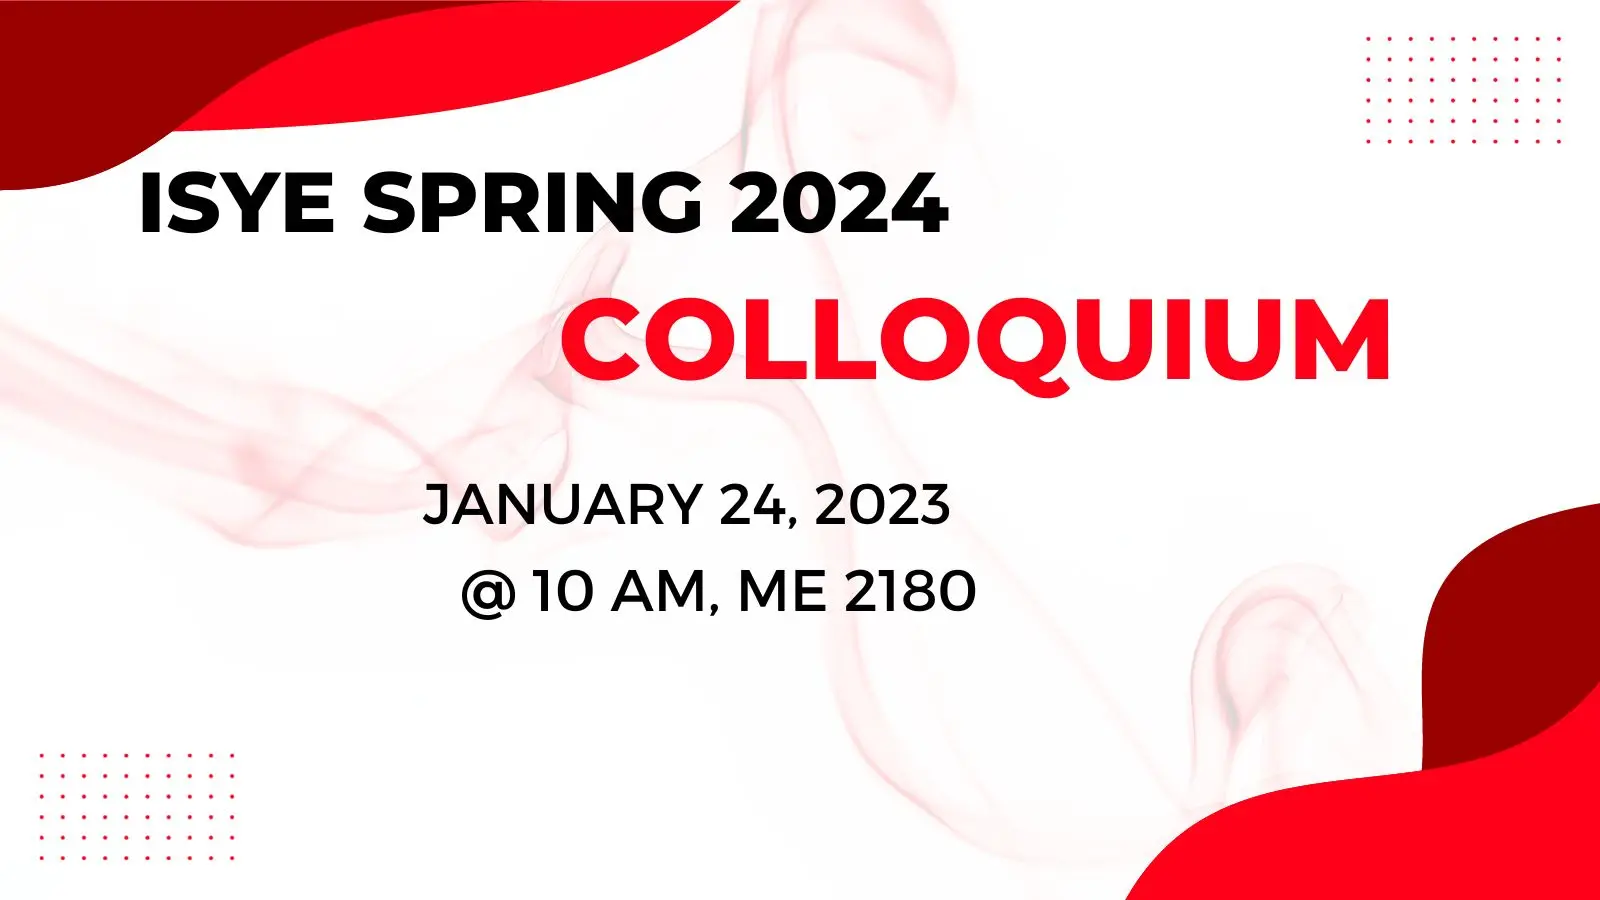 ISyE Spring 2024 Colloquium. January 24 at 10 AM